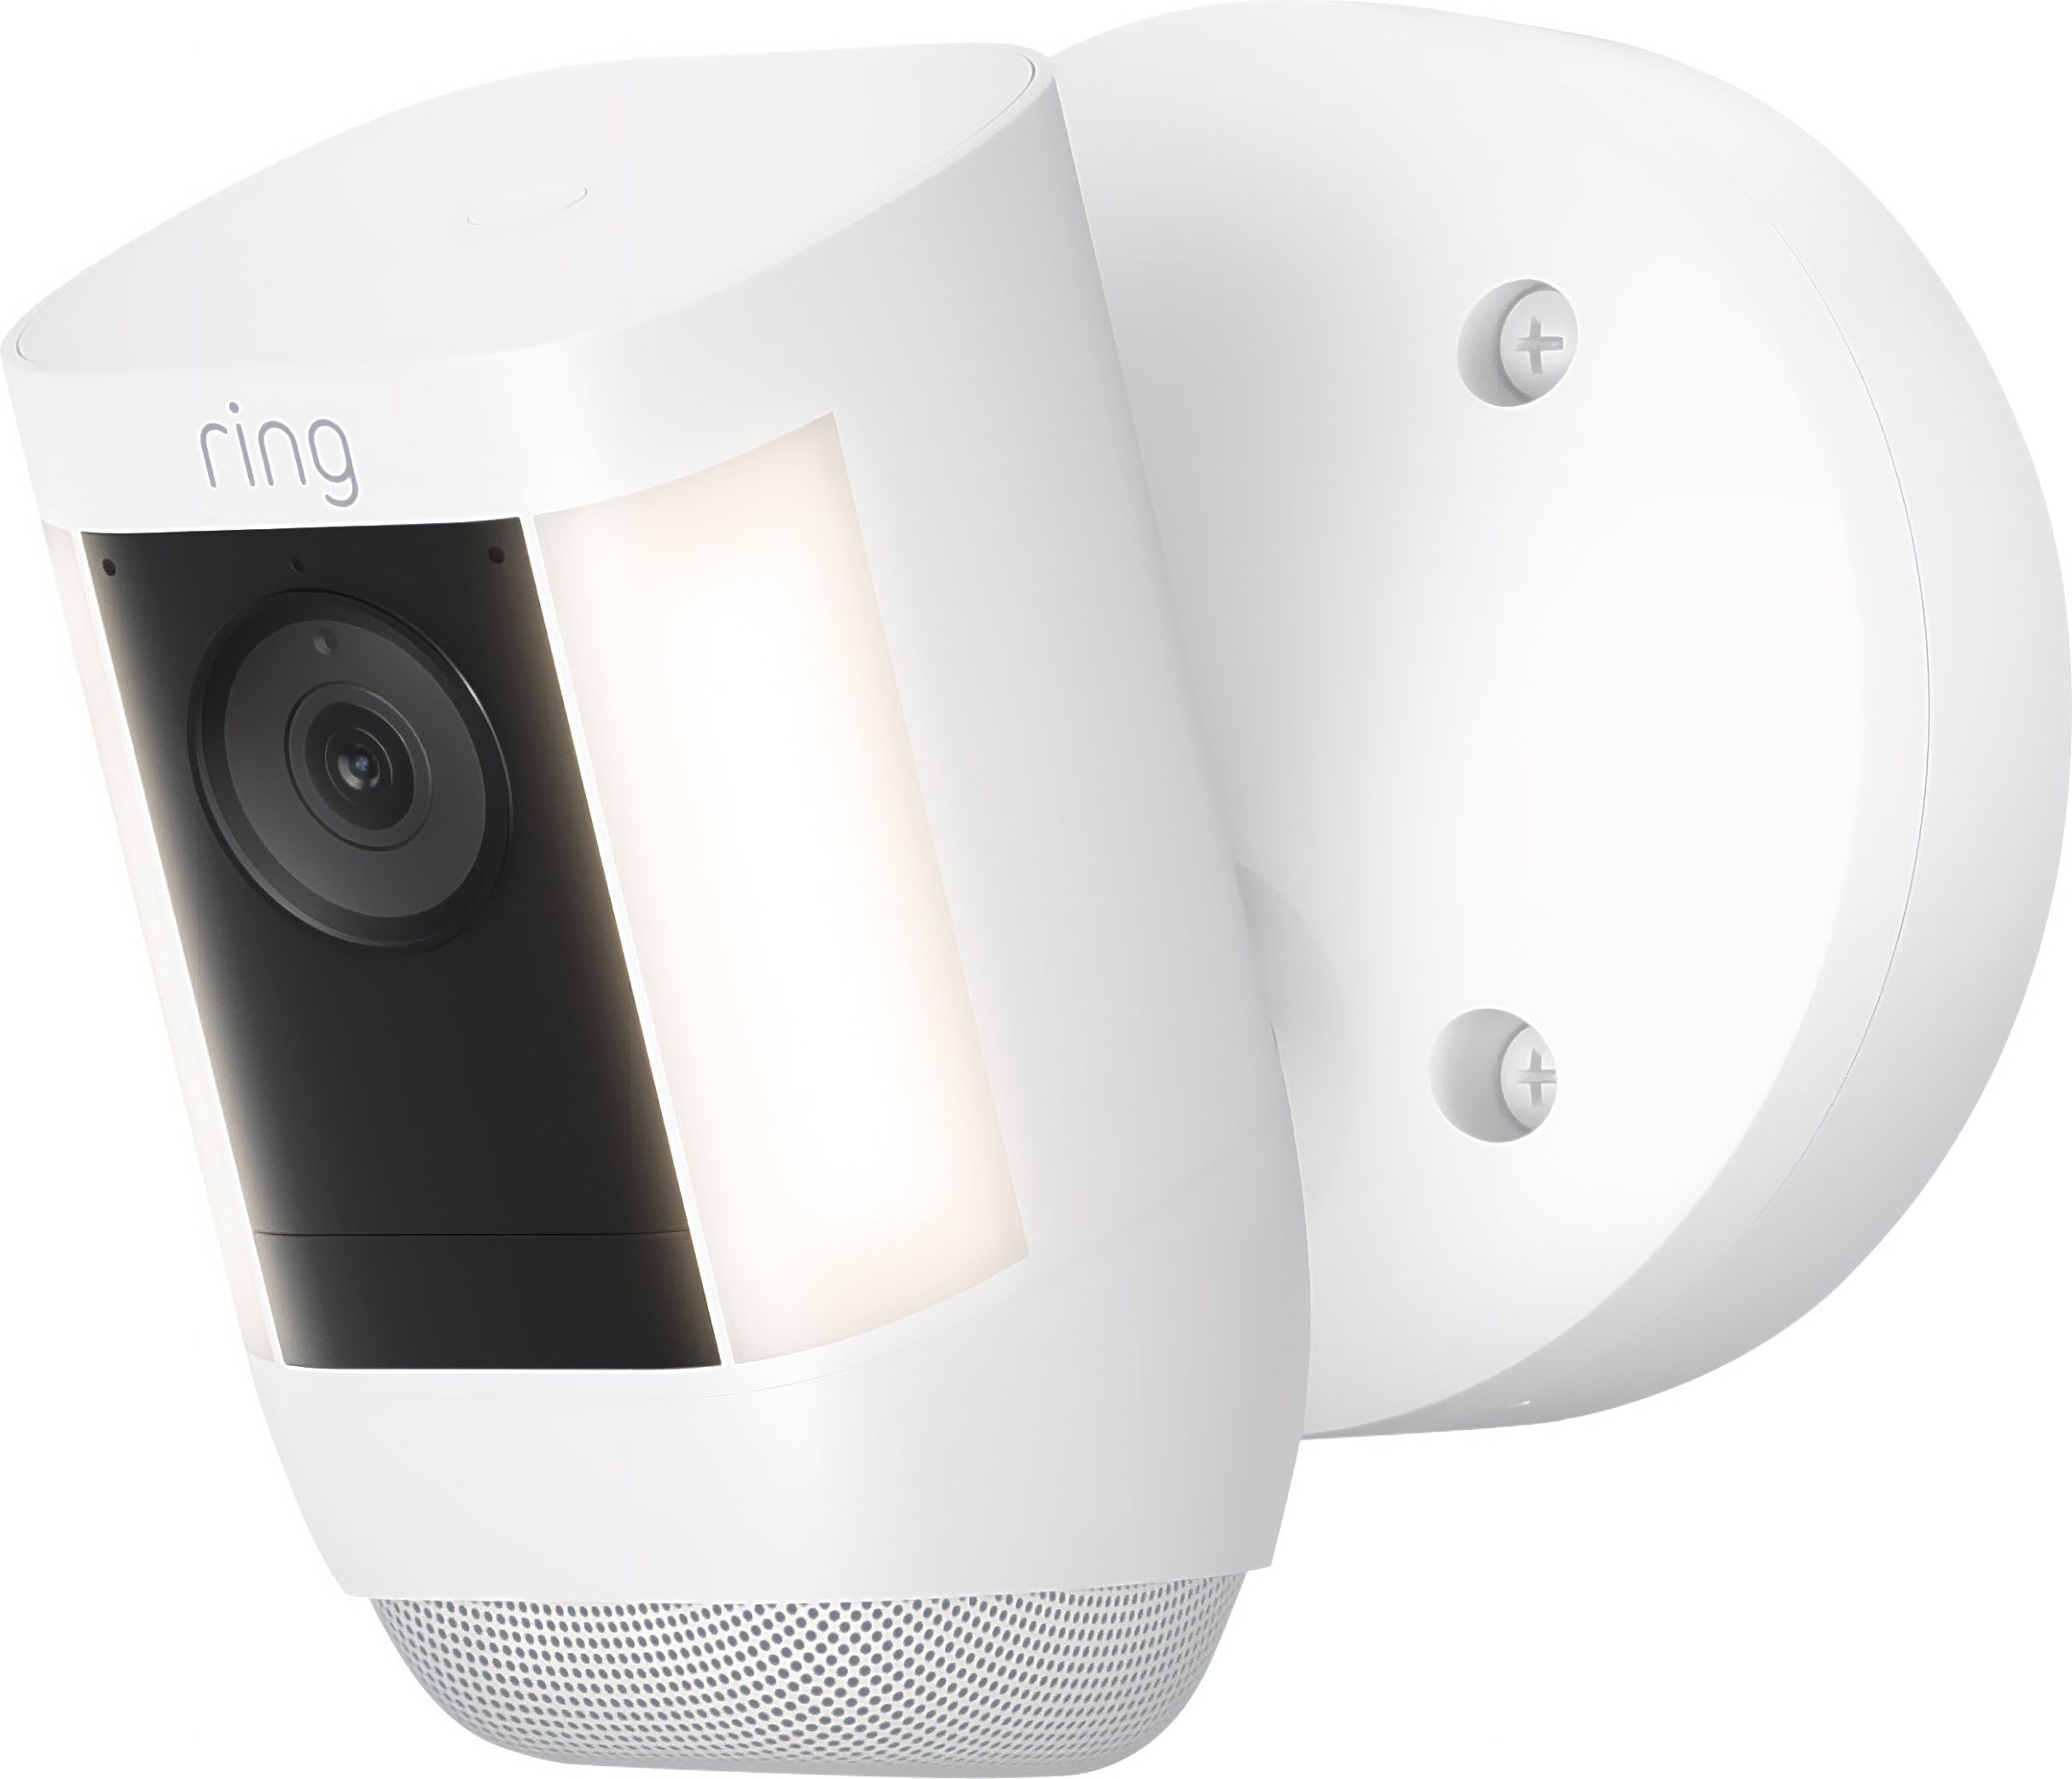 Ring Wired Spotlight Cam Pro Full HD 1080p Smart Home Security Camera - White, White